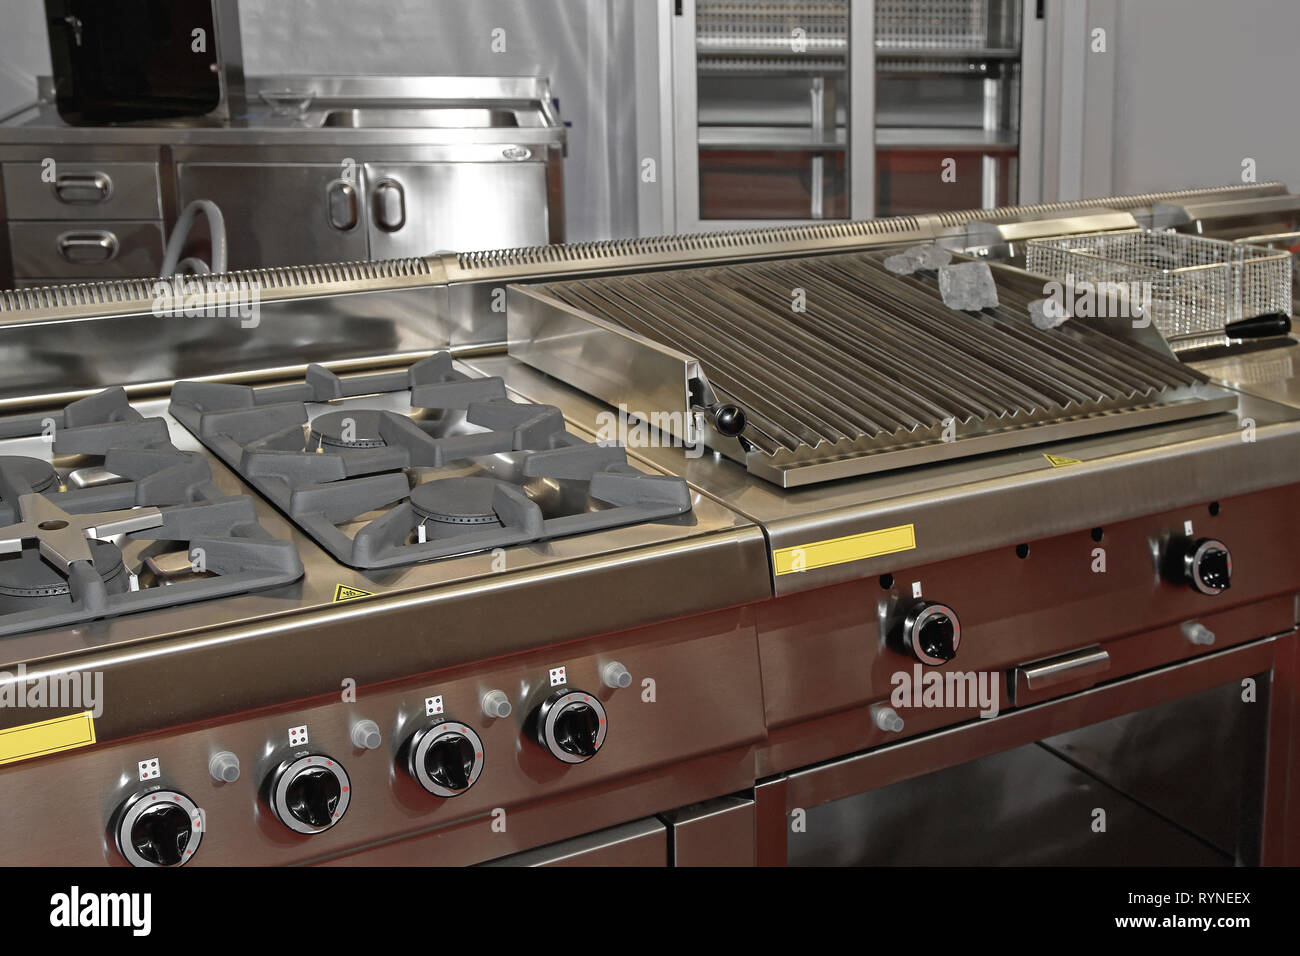 Gas Hob Stove and Grill in Professional Kitchen Restaurant Stock Photo -  Alamy